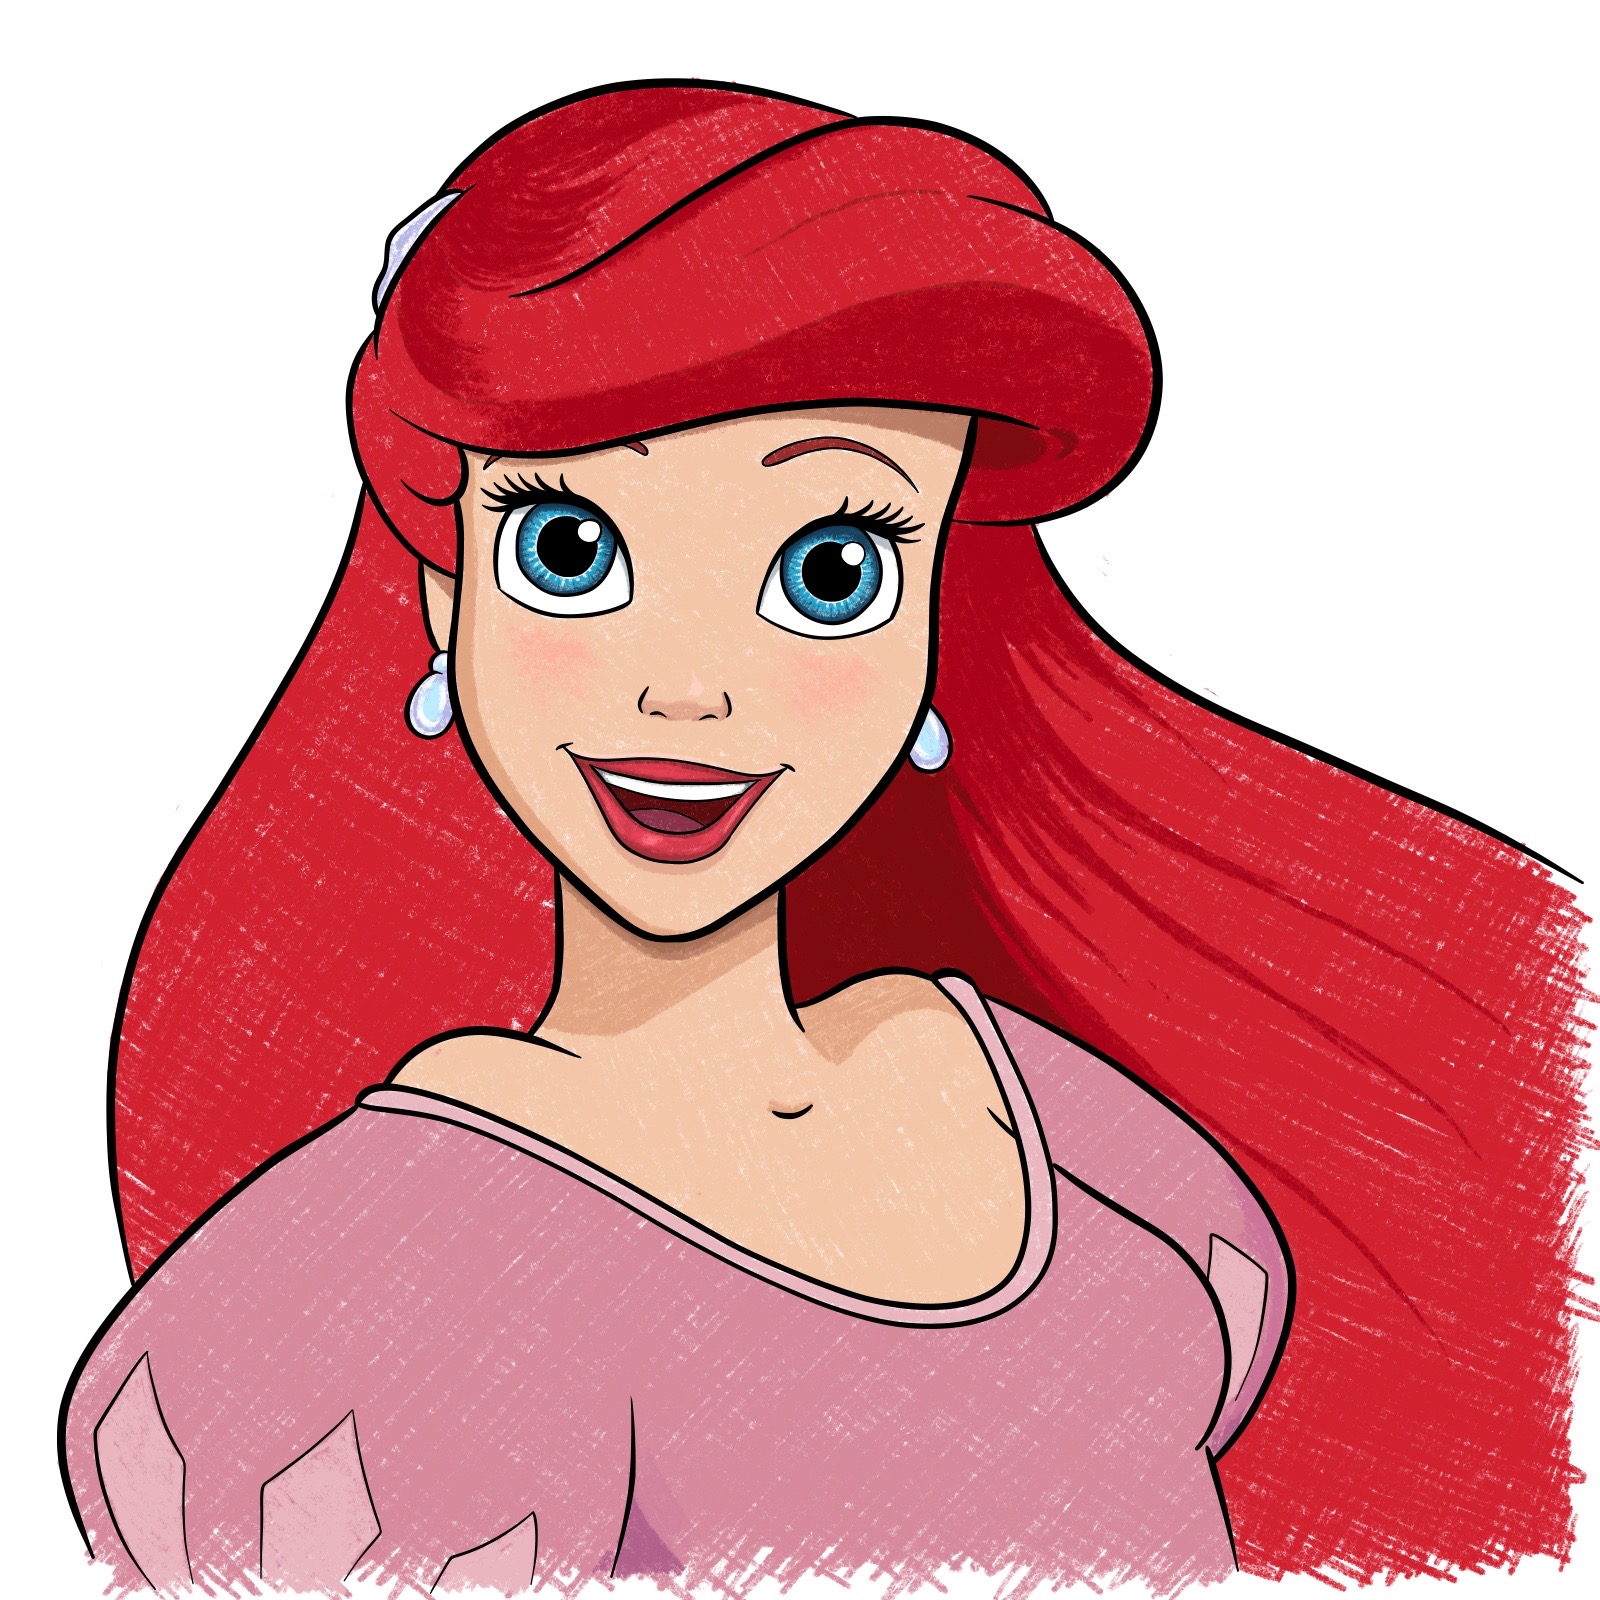 Ocean's Muse: Illustrating Ariel the Little Mermaid on a Stone